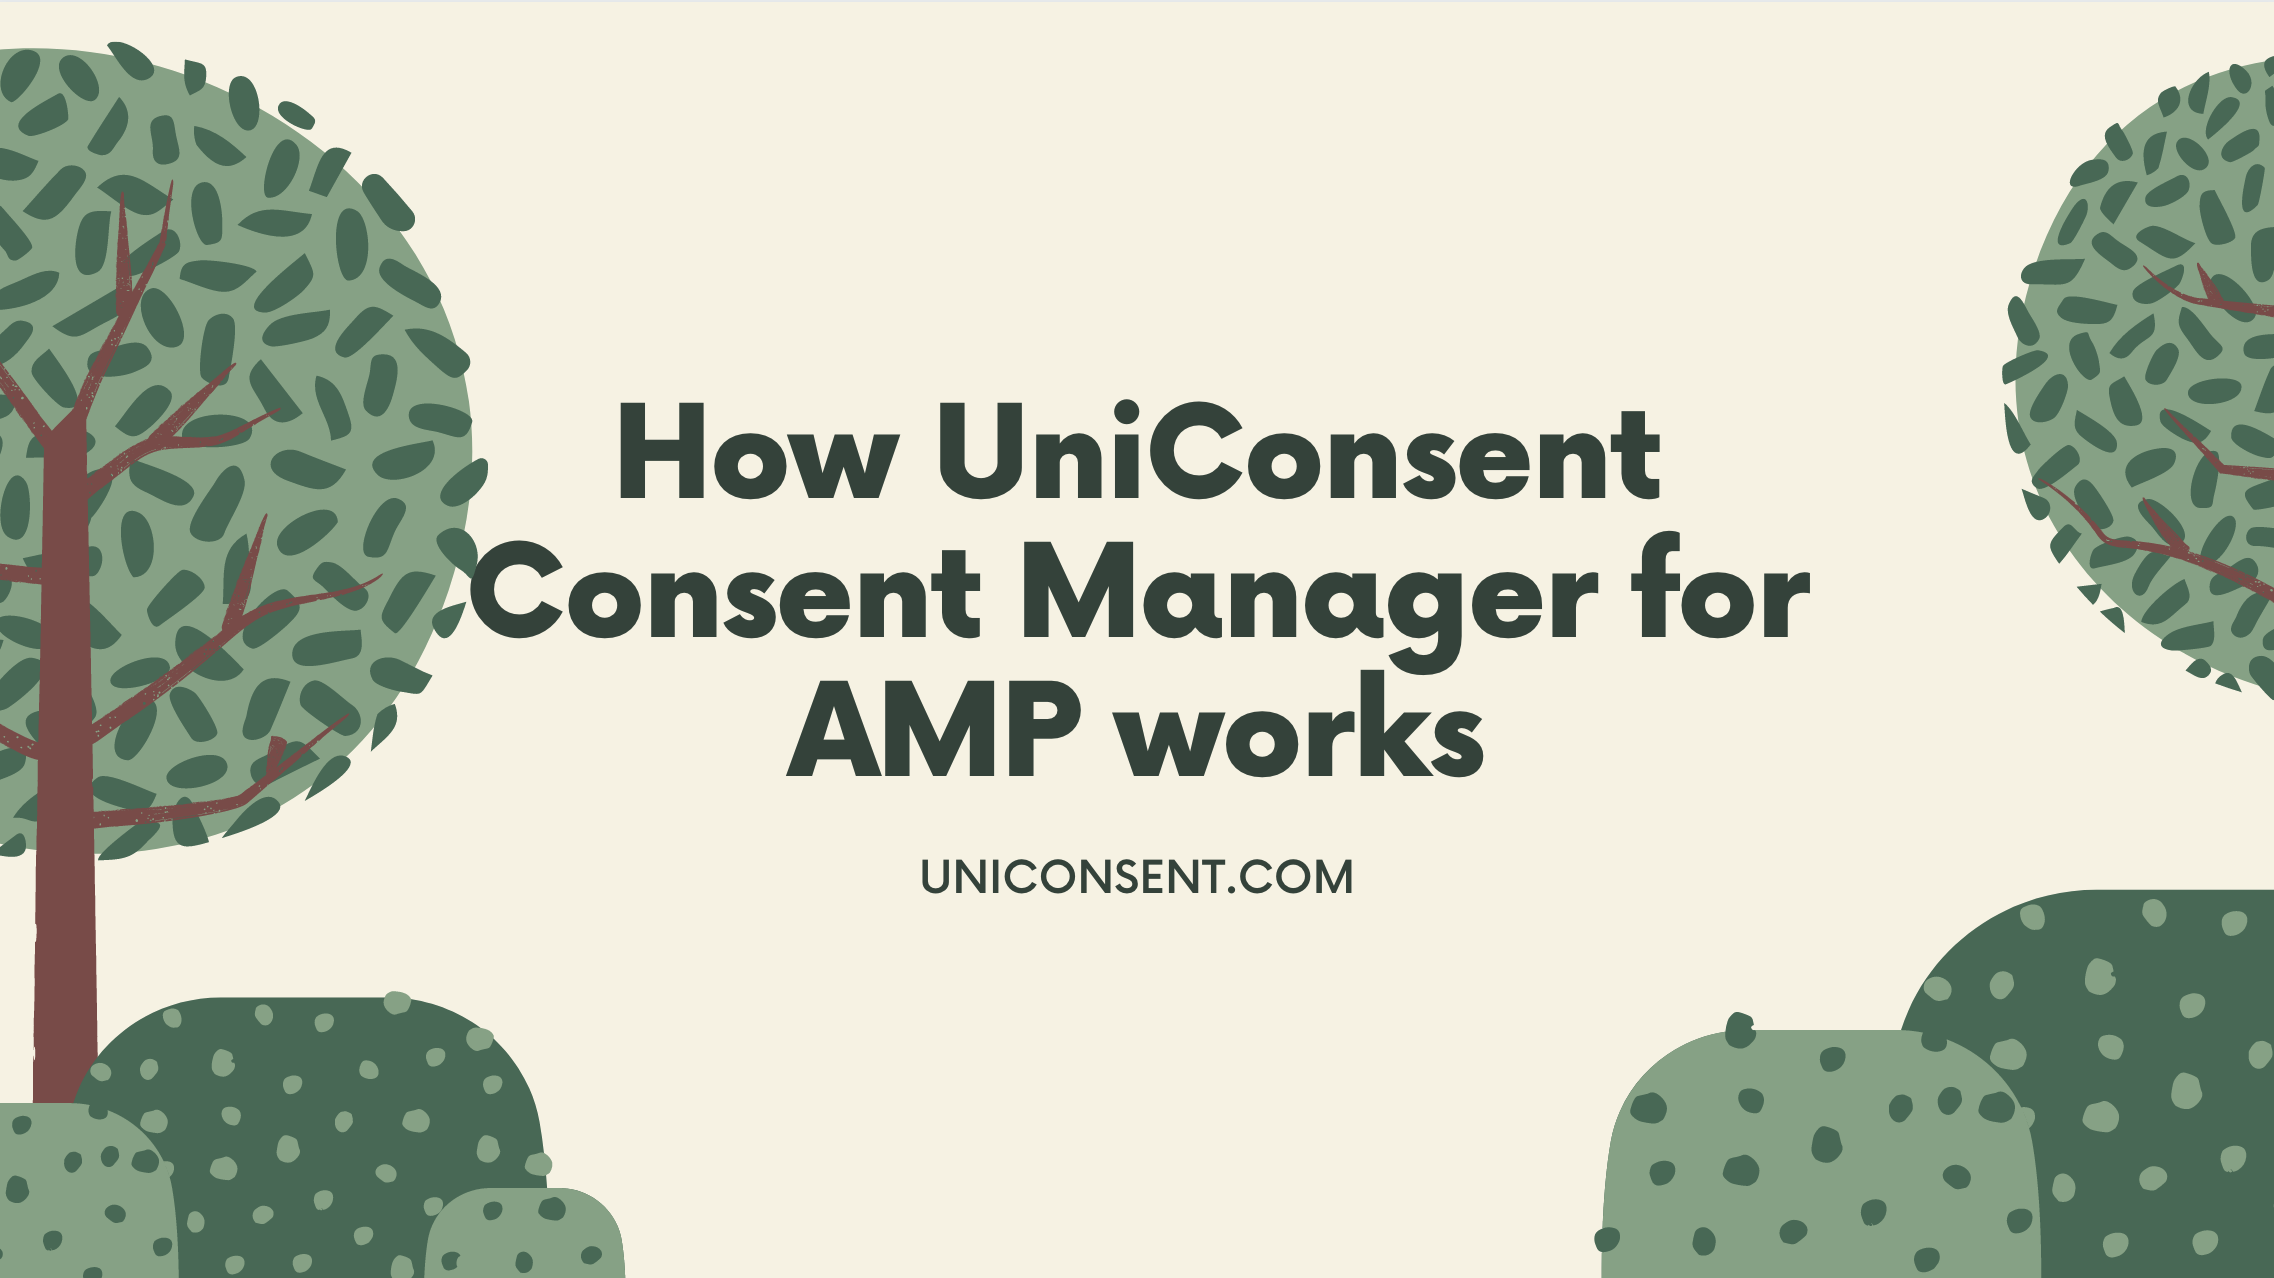 How UniConsent Consent Manager for AMP works